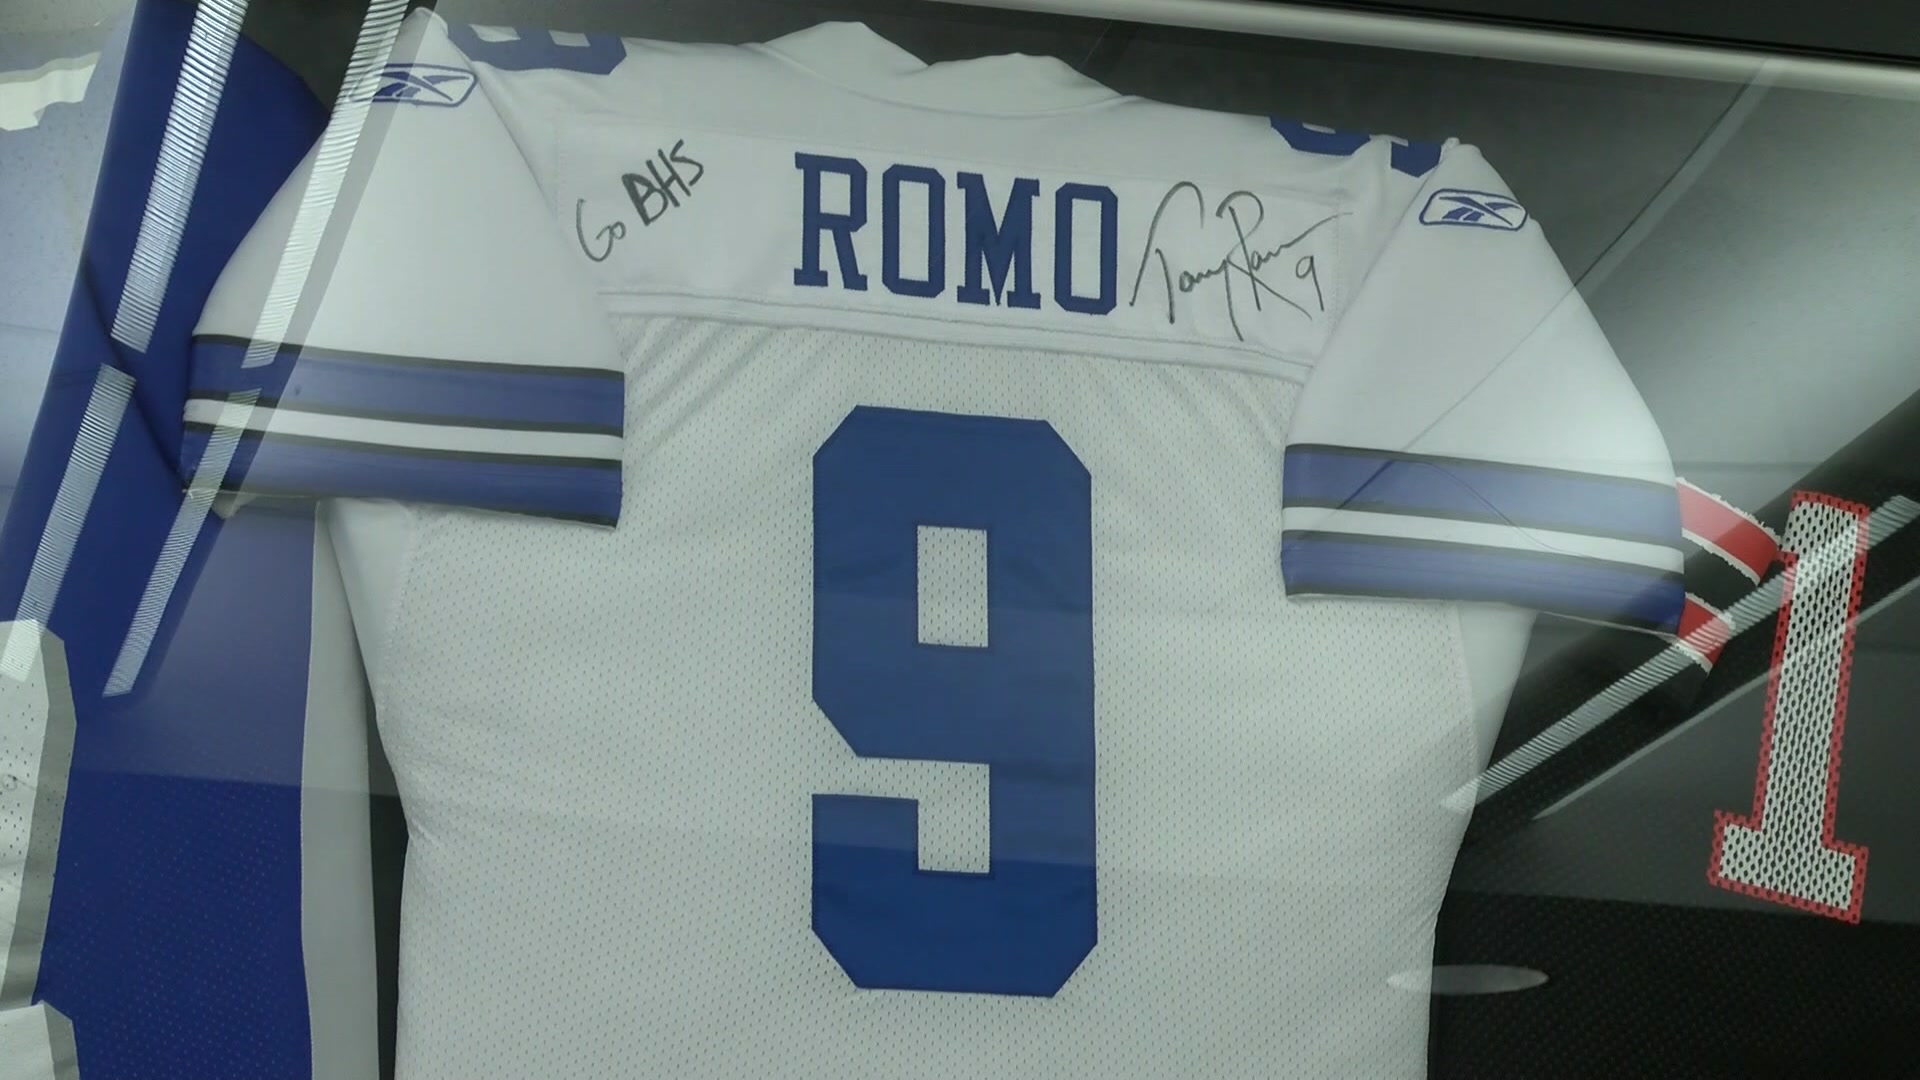 Tony Romo featured in new documentary, 'Now or Never'